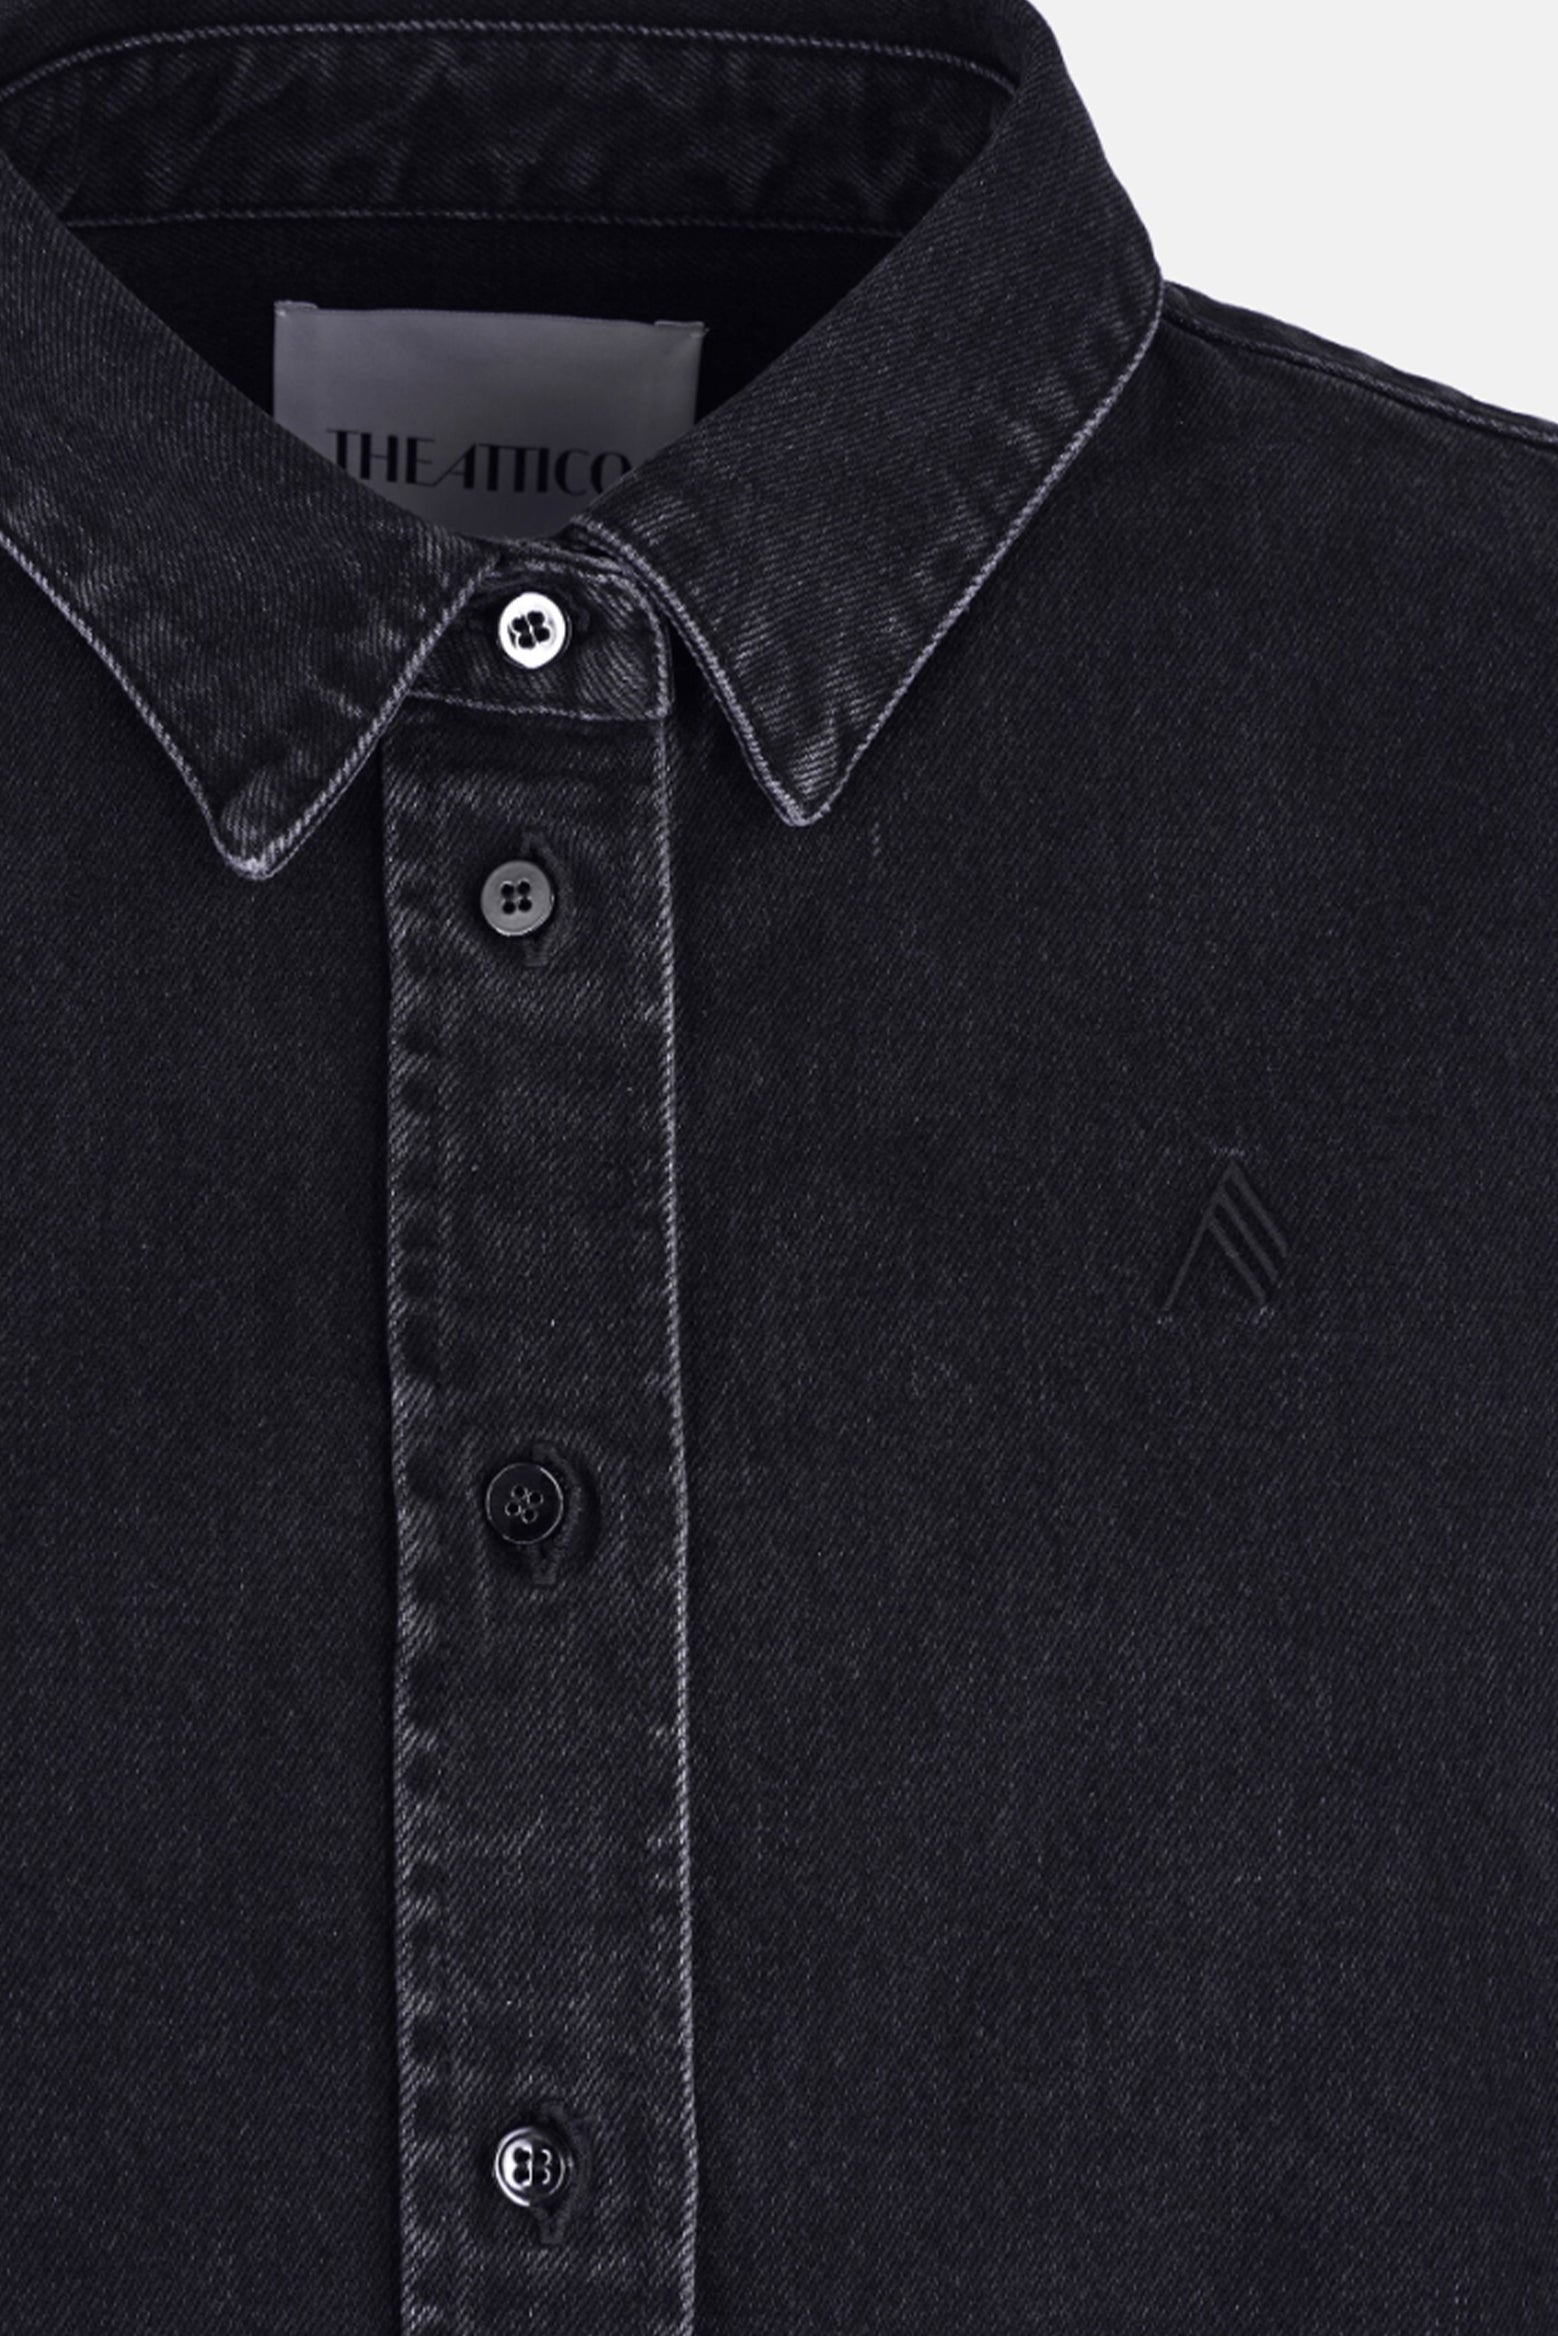 The Attico Diana Shirt in Black available at The New Trend Australia